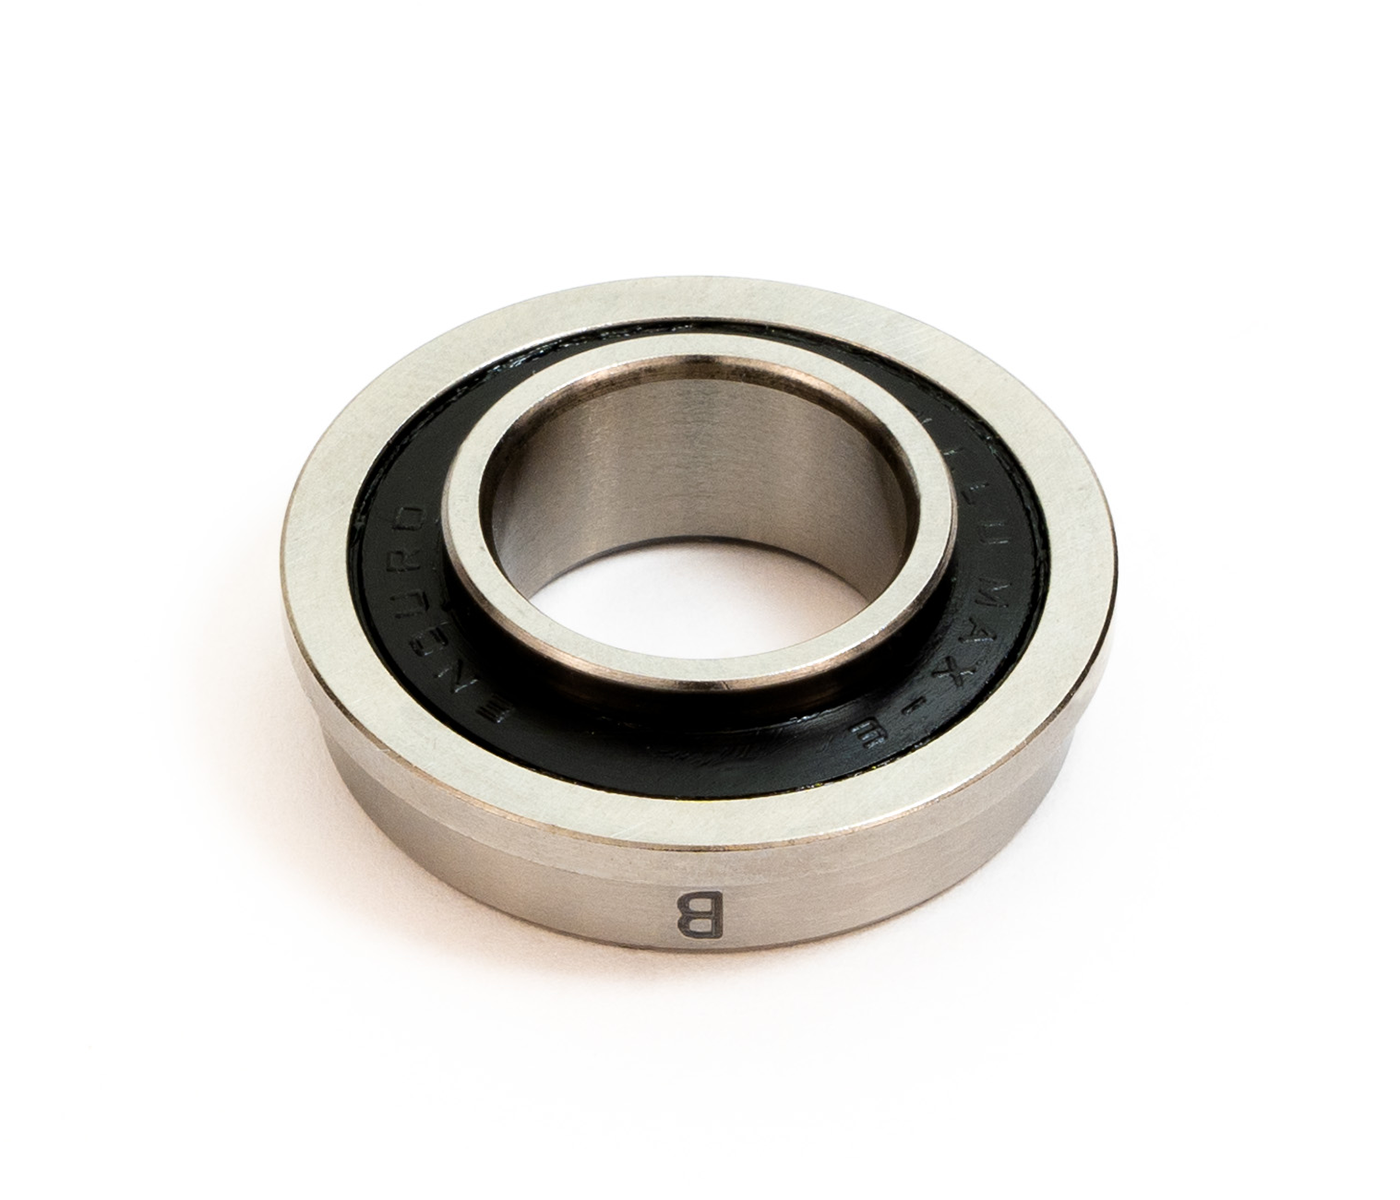 Enduro F6902 LLU MAX-EB - ABEC-3, Flanged, Extended Race, Radial Bearing (C3 Clearance) - 15mm x 28mm x 7/9.5mm